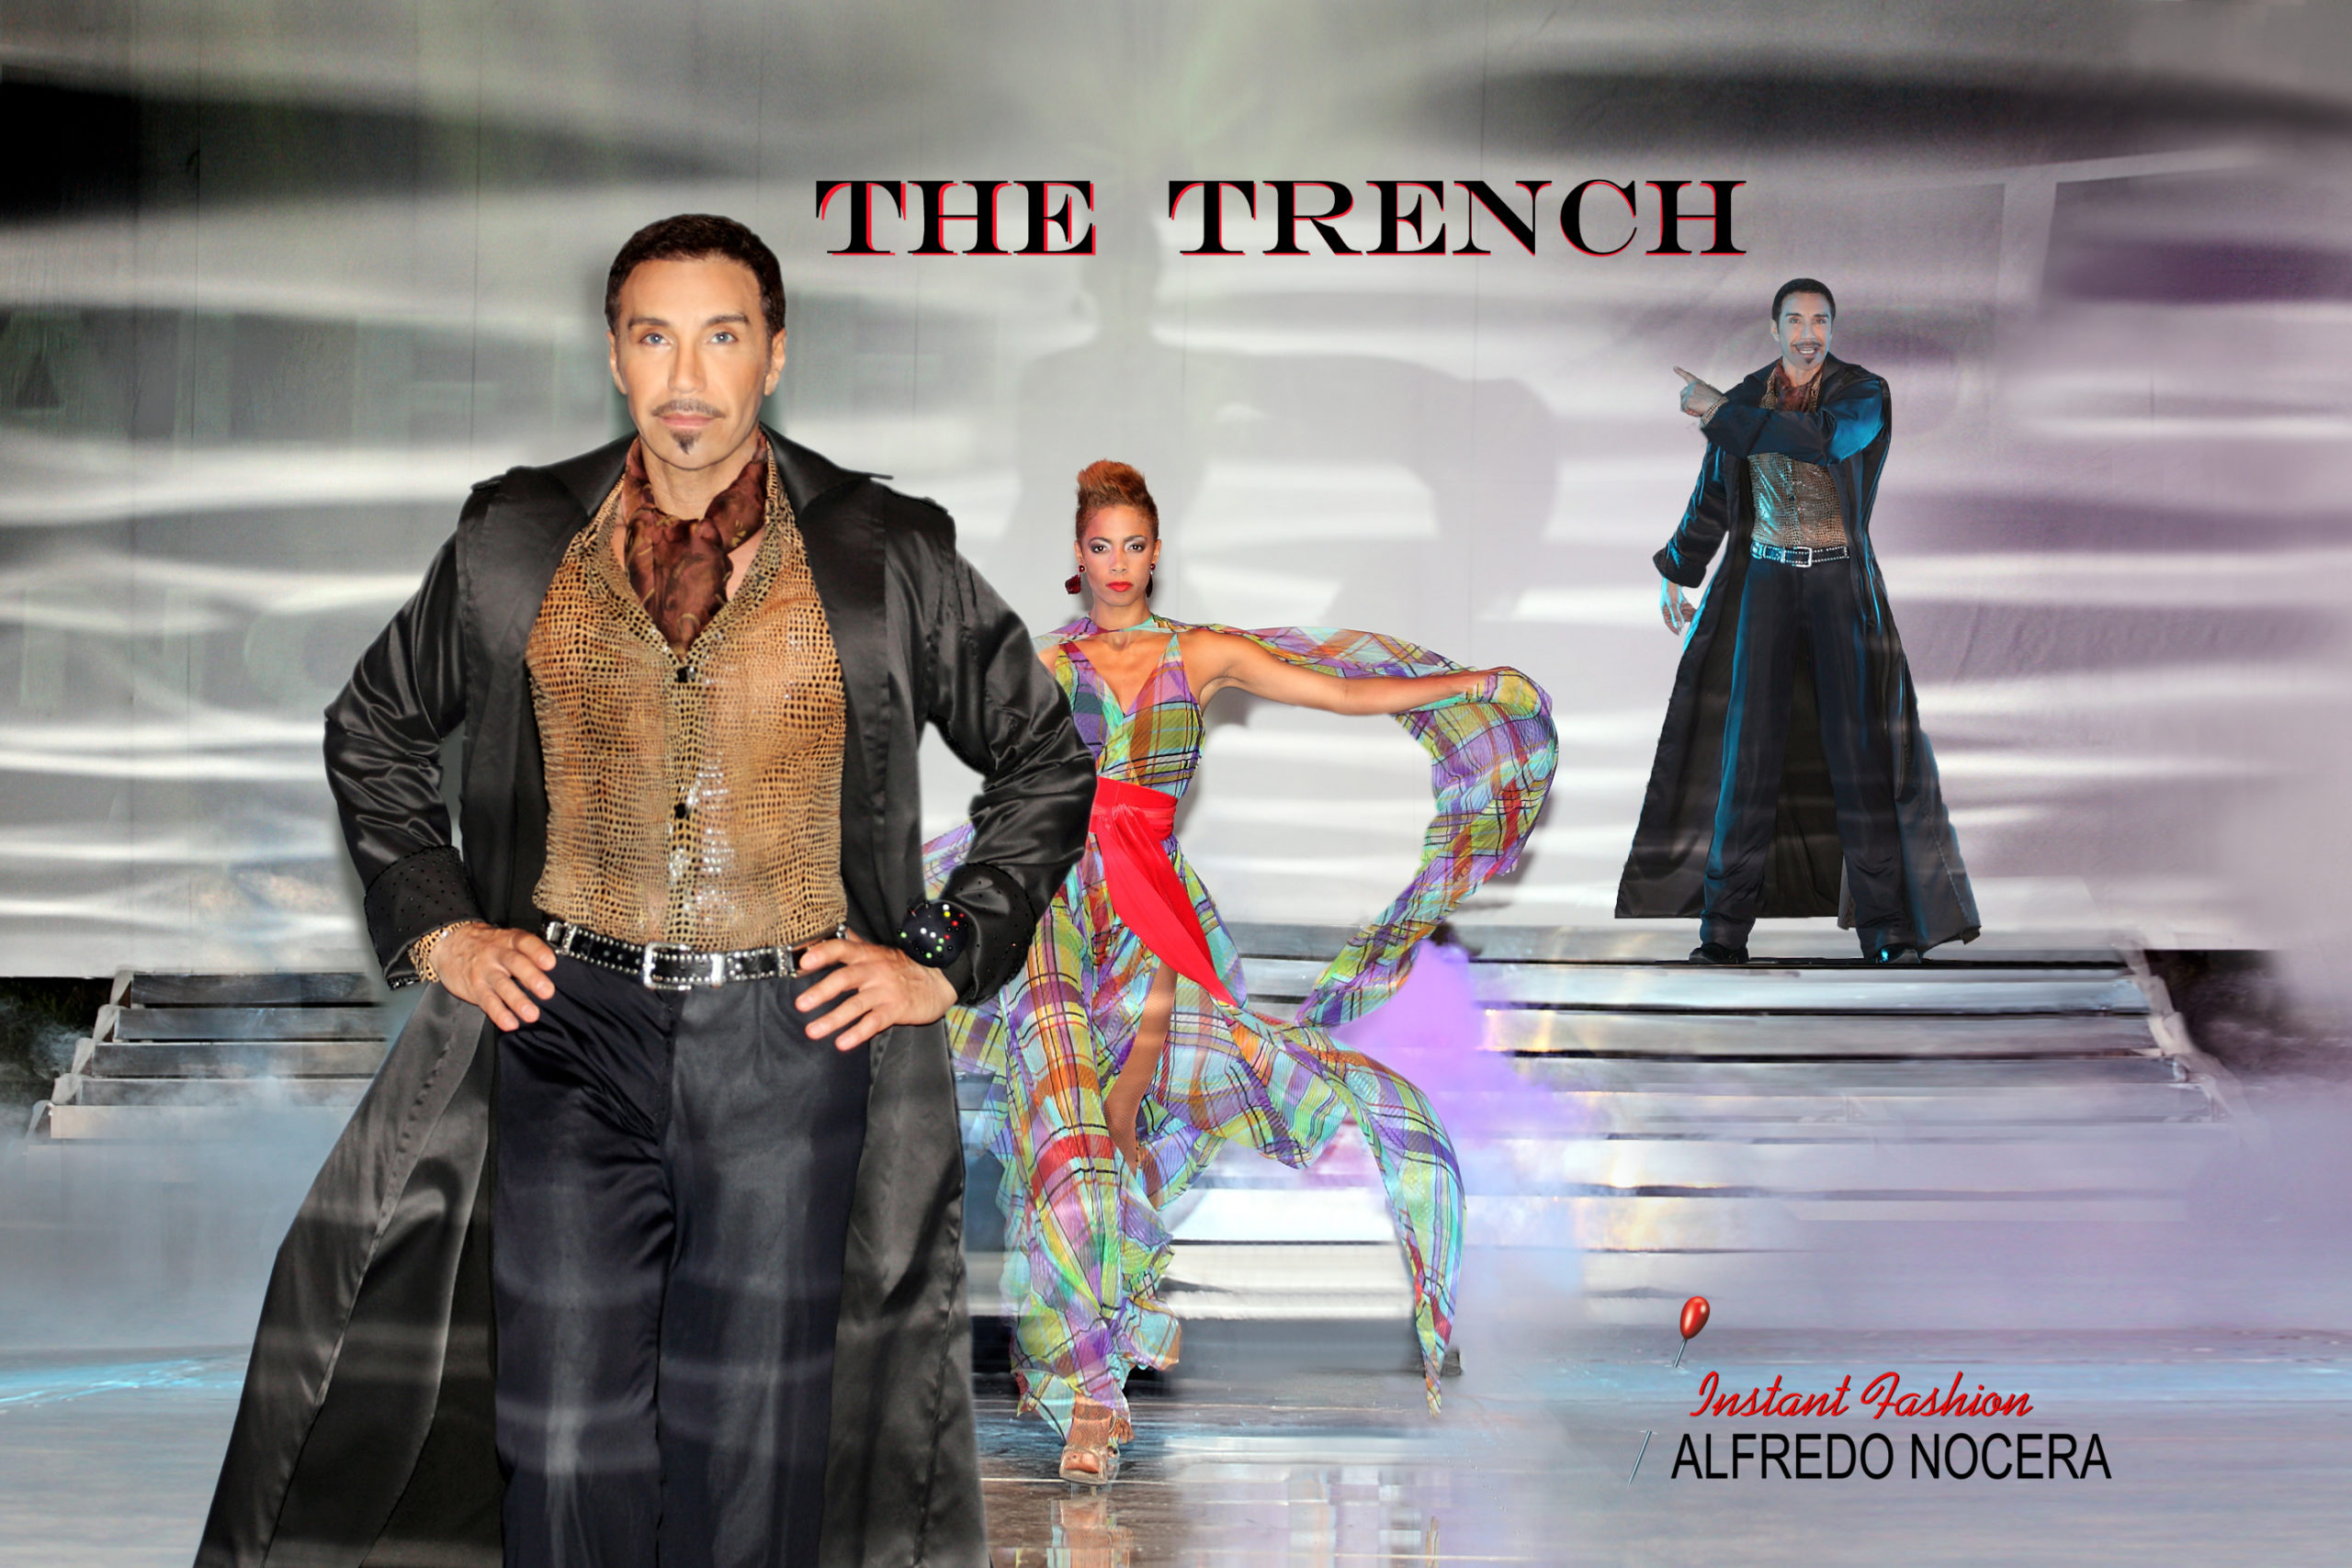 THE TRENCH